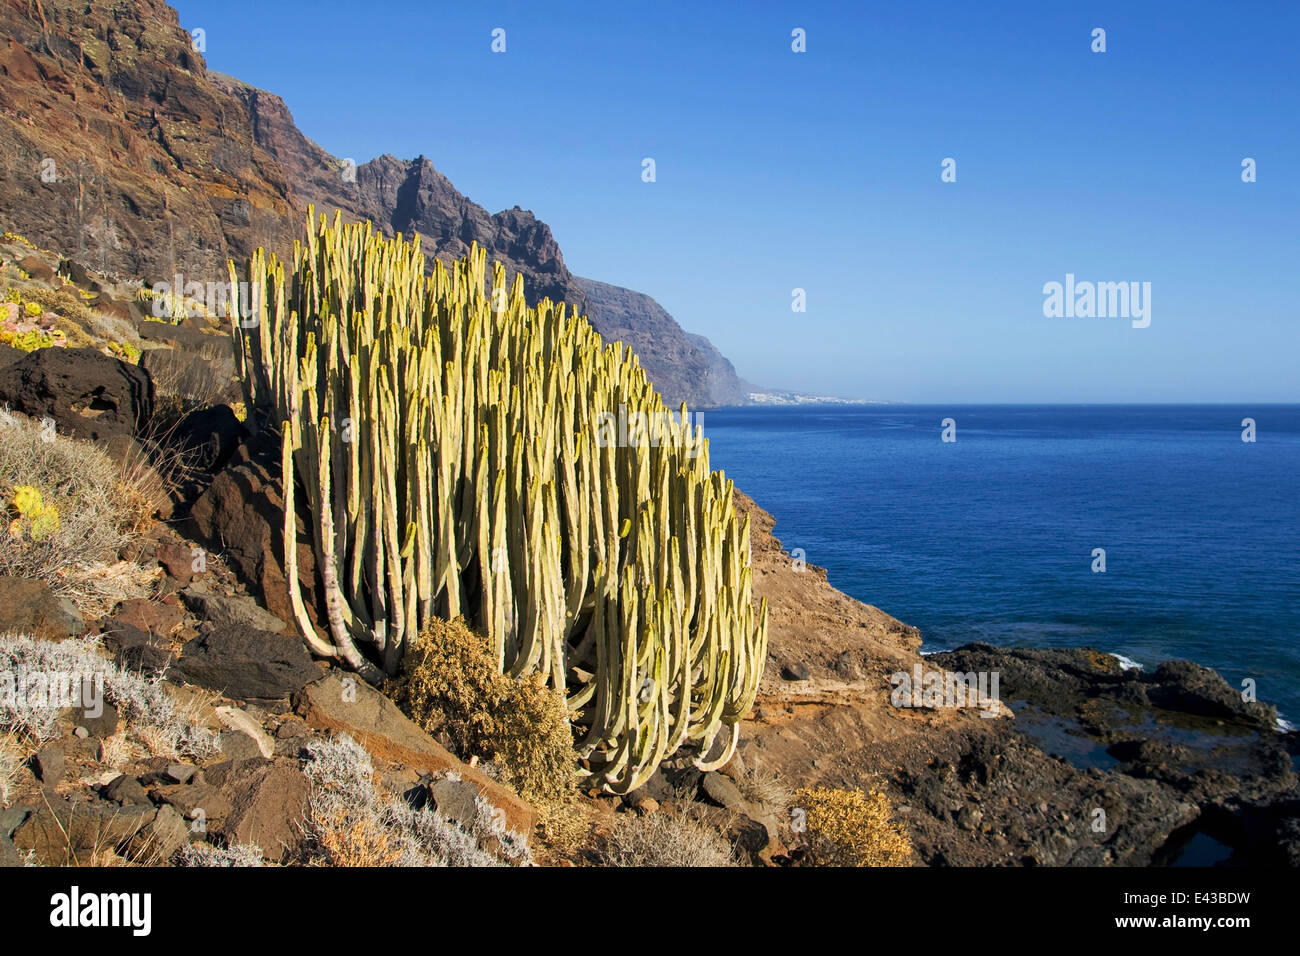 Canary Island Spurge (Euphorbia canariensis), a plant that grows natively in the arid and humid environment of Canary Islands. Stock Photo